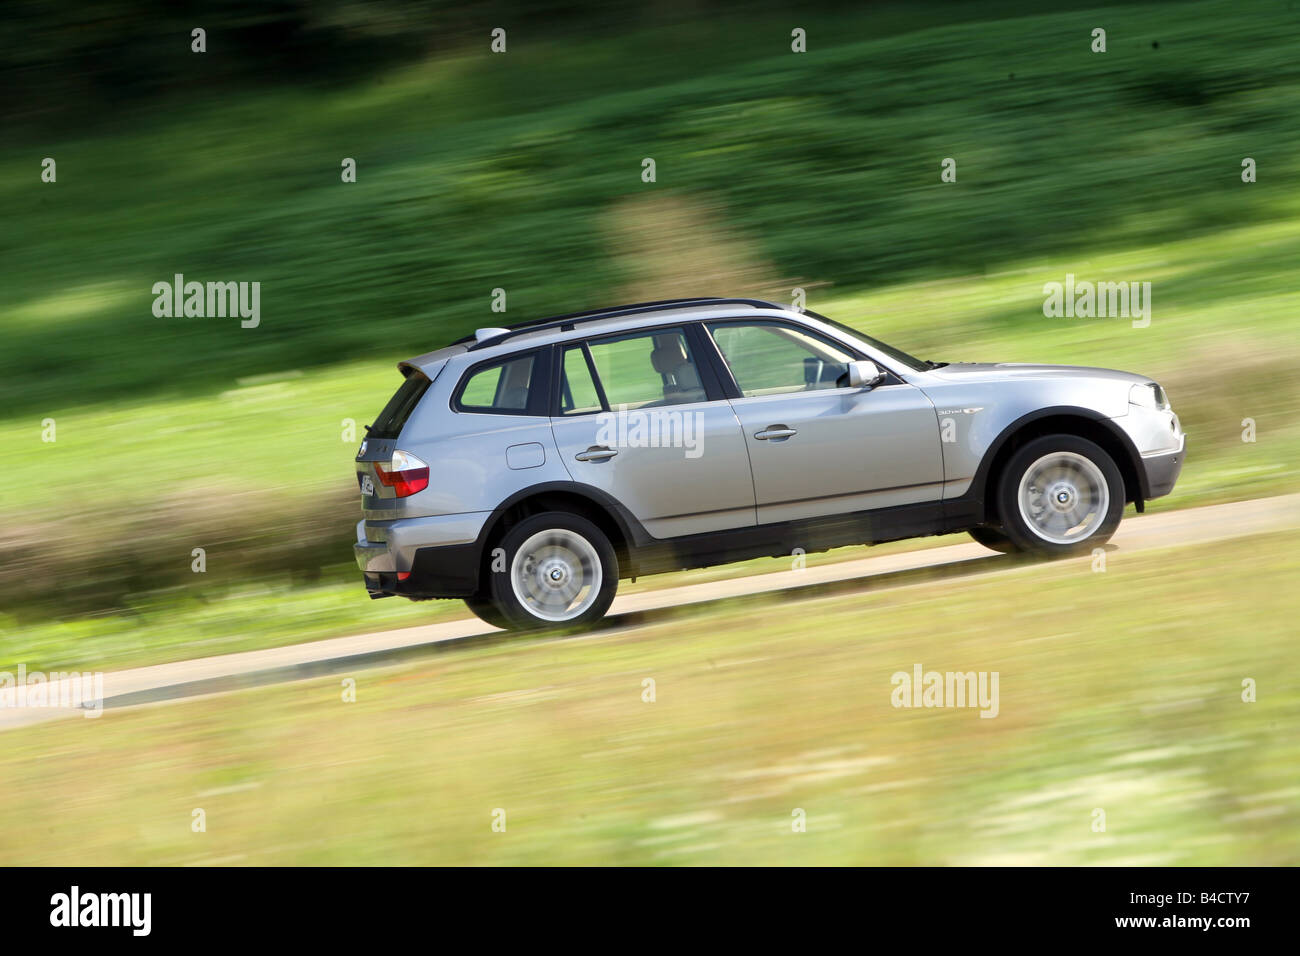 BMW X3 3.0 sd, model year 2006-, anthracite, driving, side view, country road Stock Photo